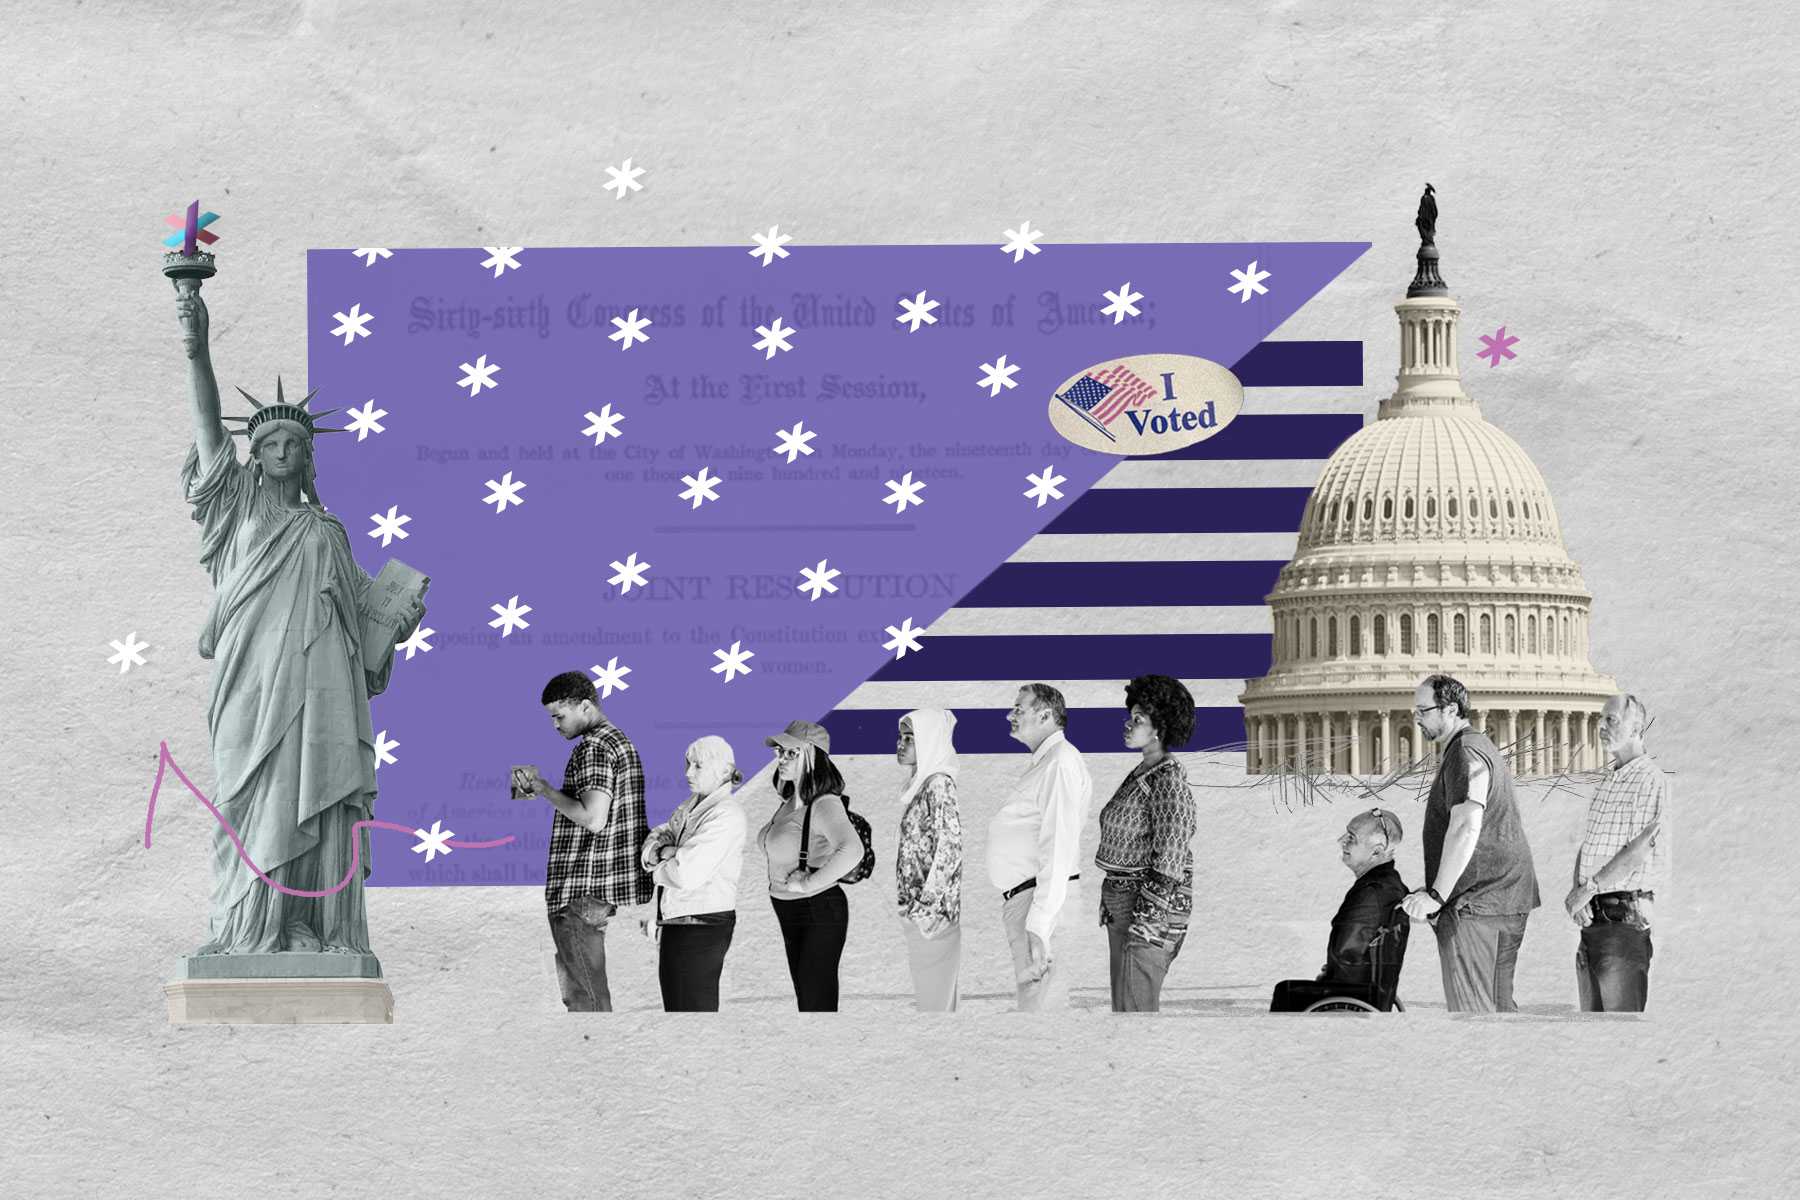 Photo illustration of a modified US flag with asterisks. A diverse line of people stand in line to cast their ballots.